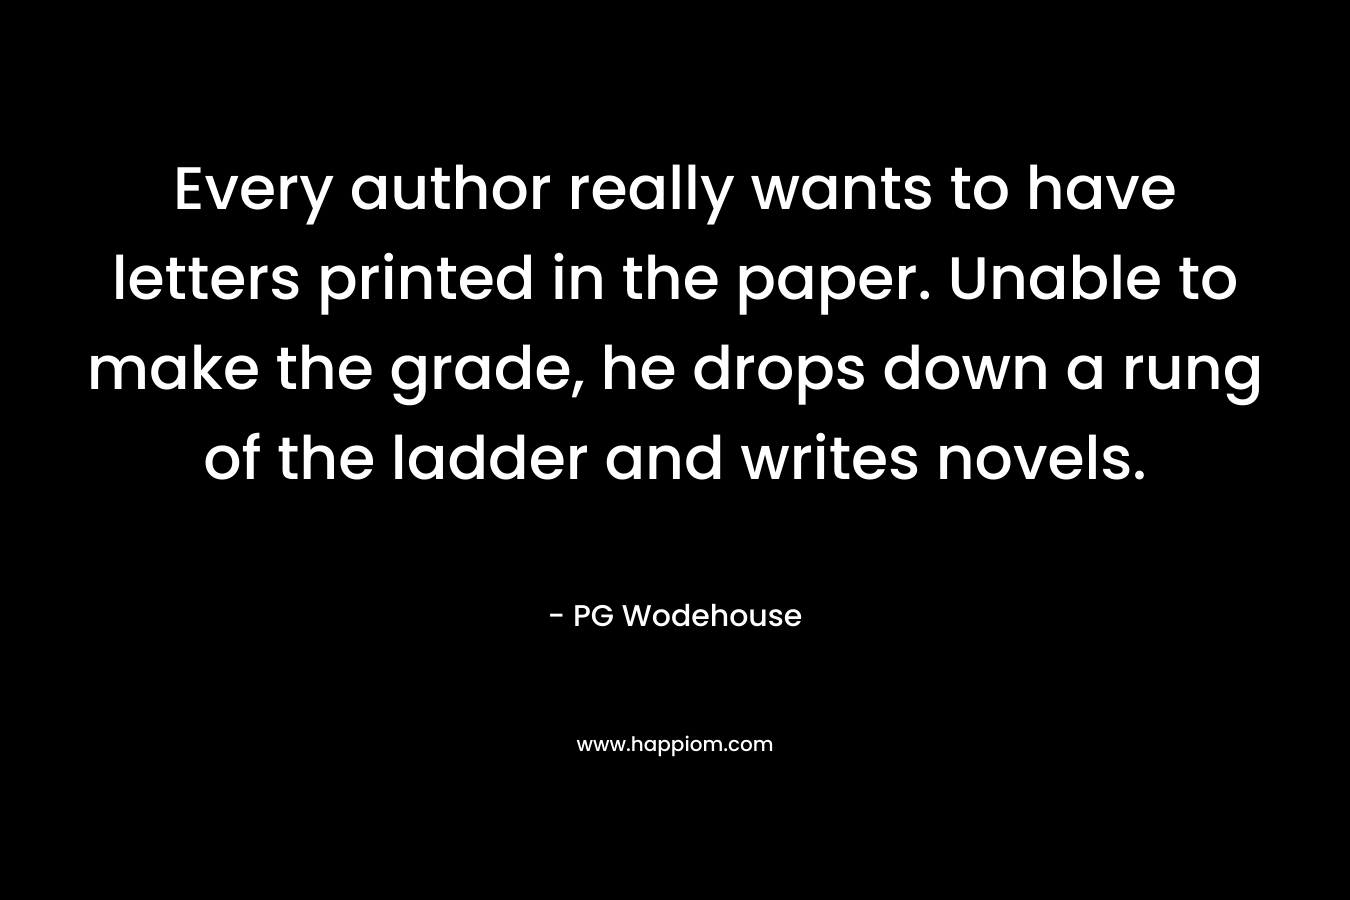 Every author really wants to have letters printed in the paper. Unable to make the grade, he drops down a rung of the ladder and writes novels.